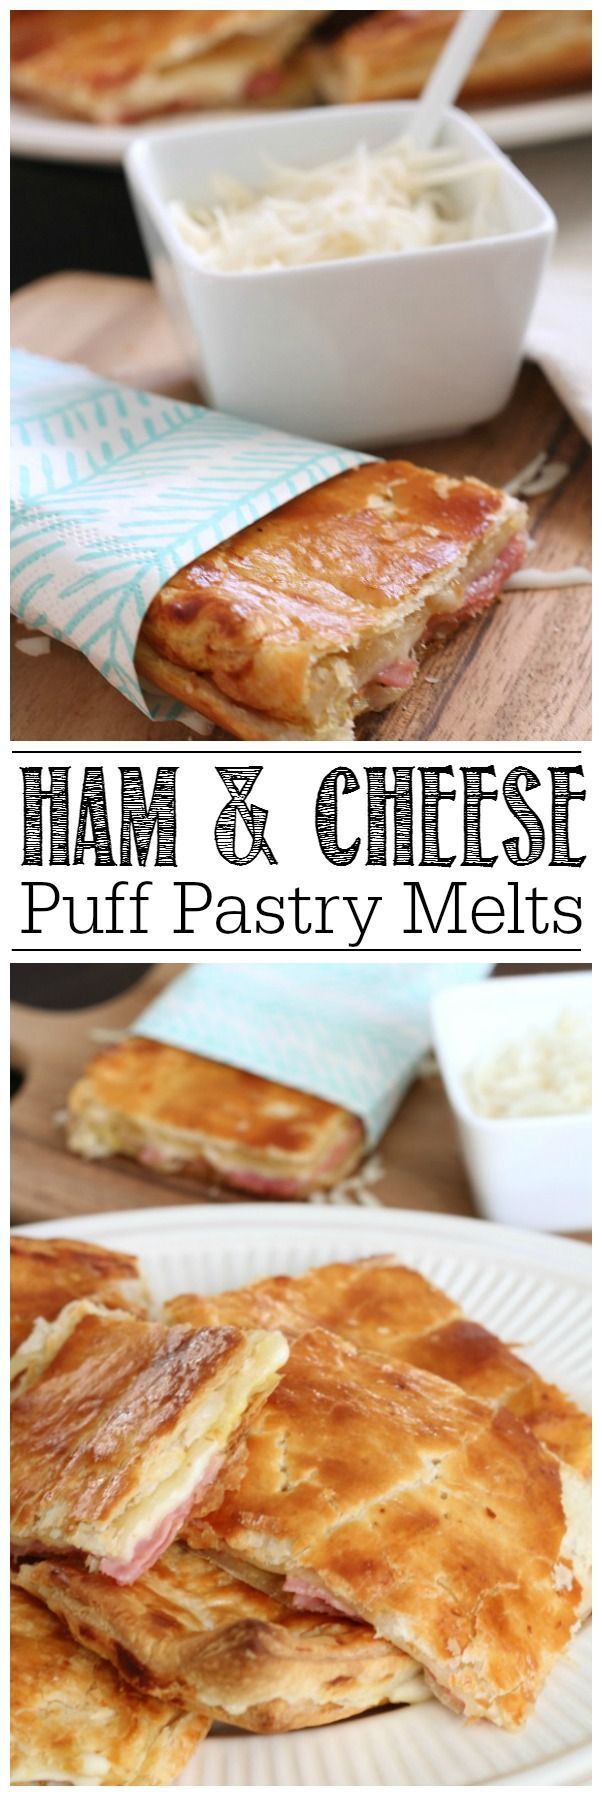 Take your grilled cheese up a notch with this ham and cheese melt recipe. SO good and can be customized with any filling that you